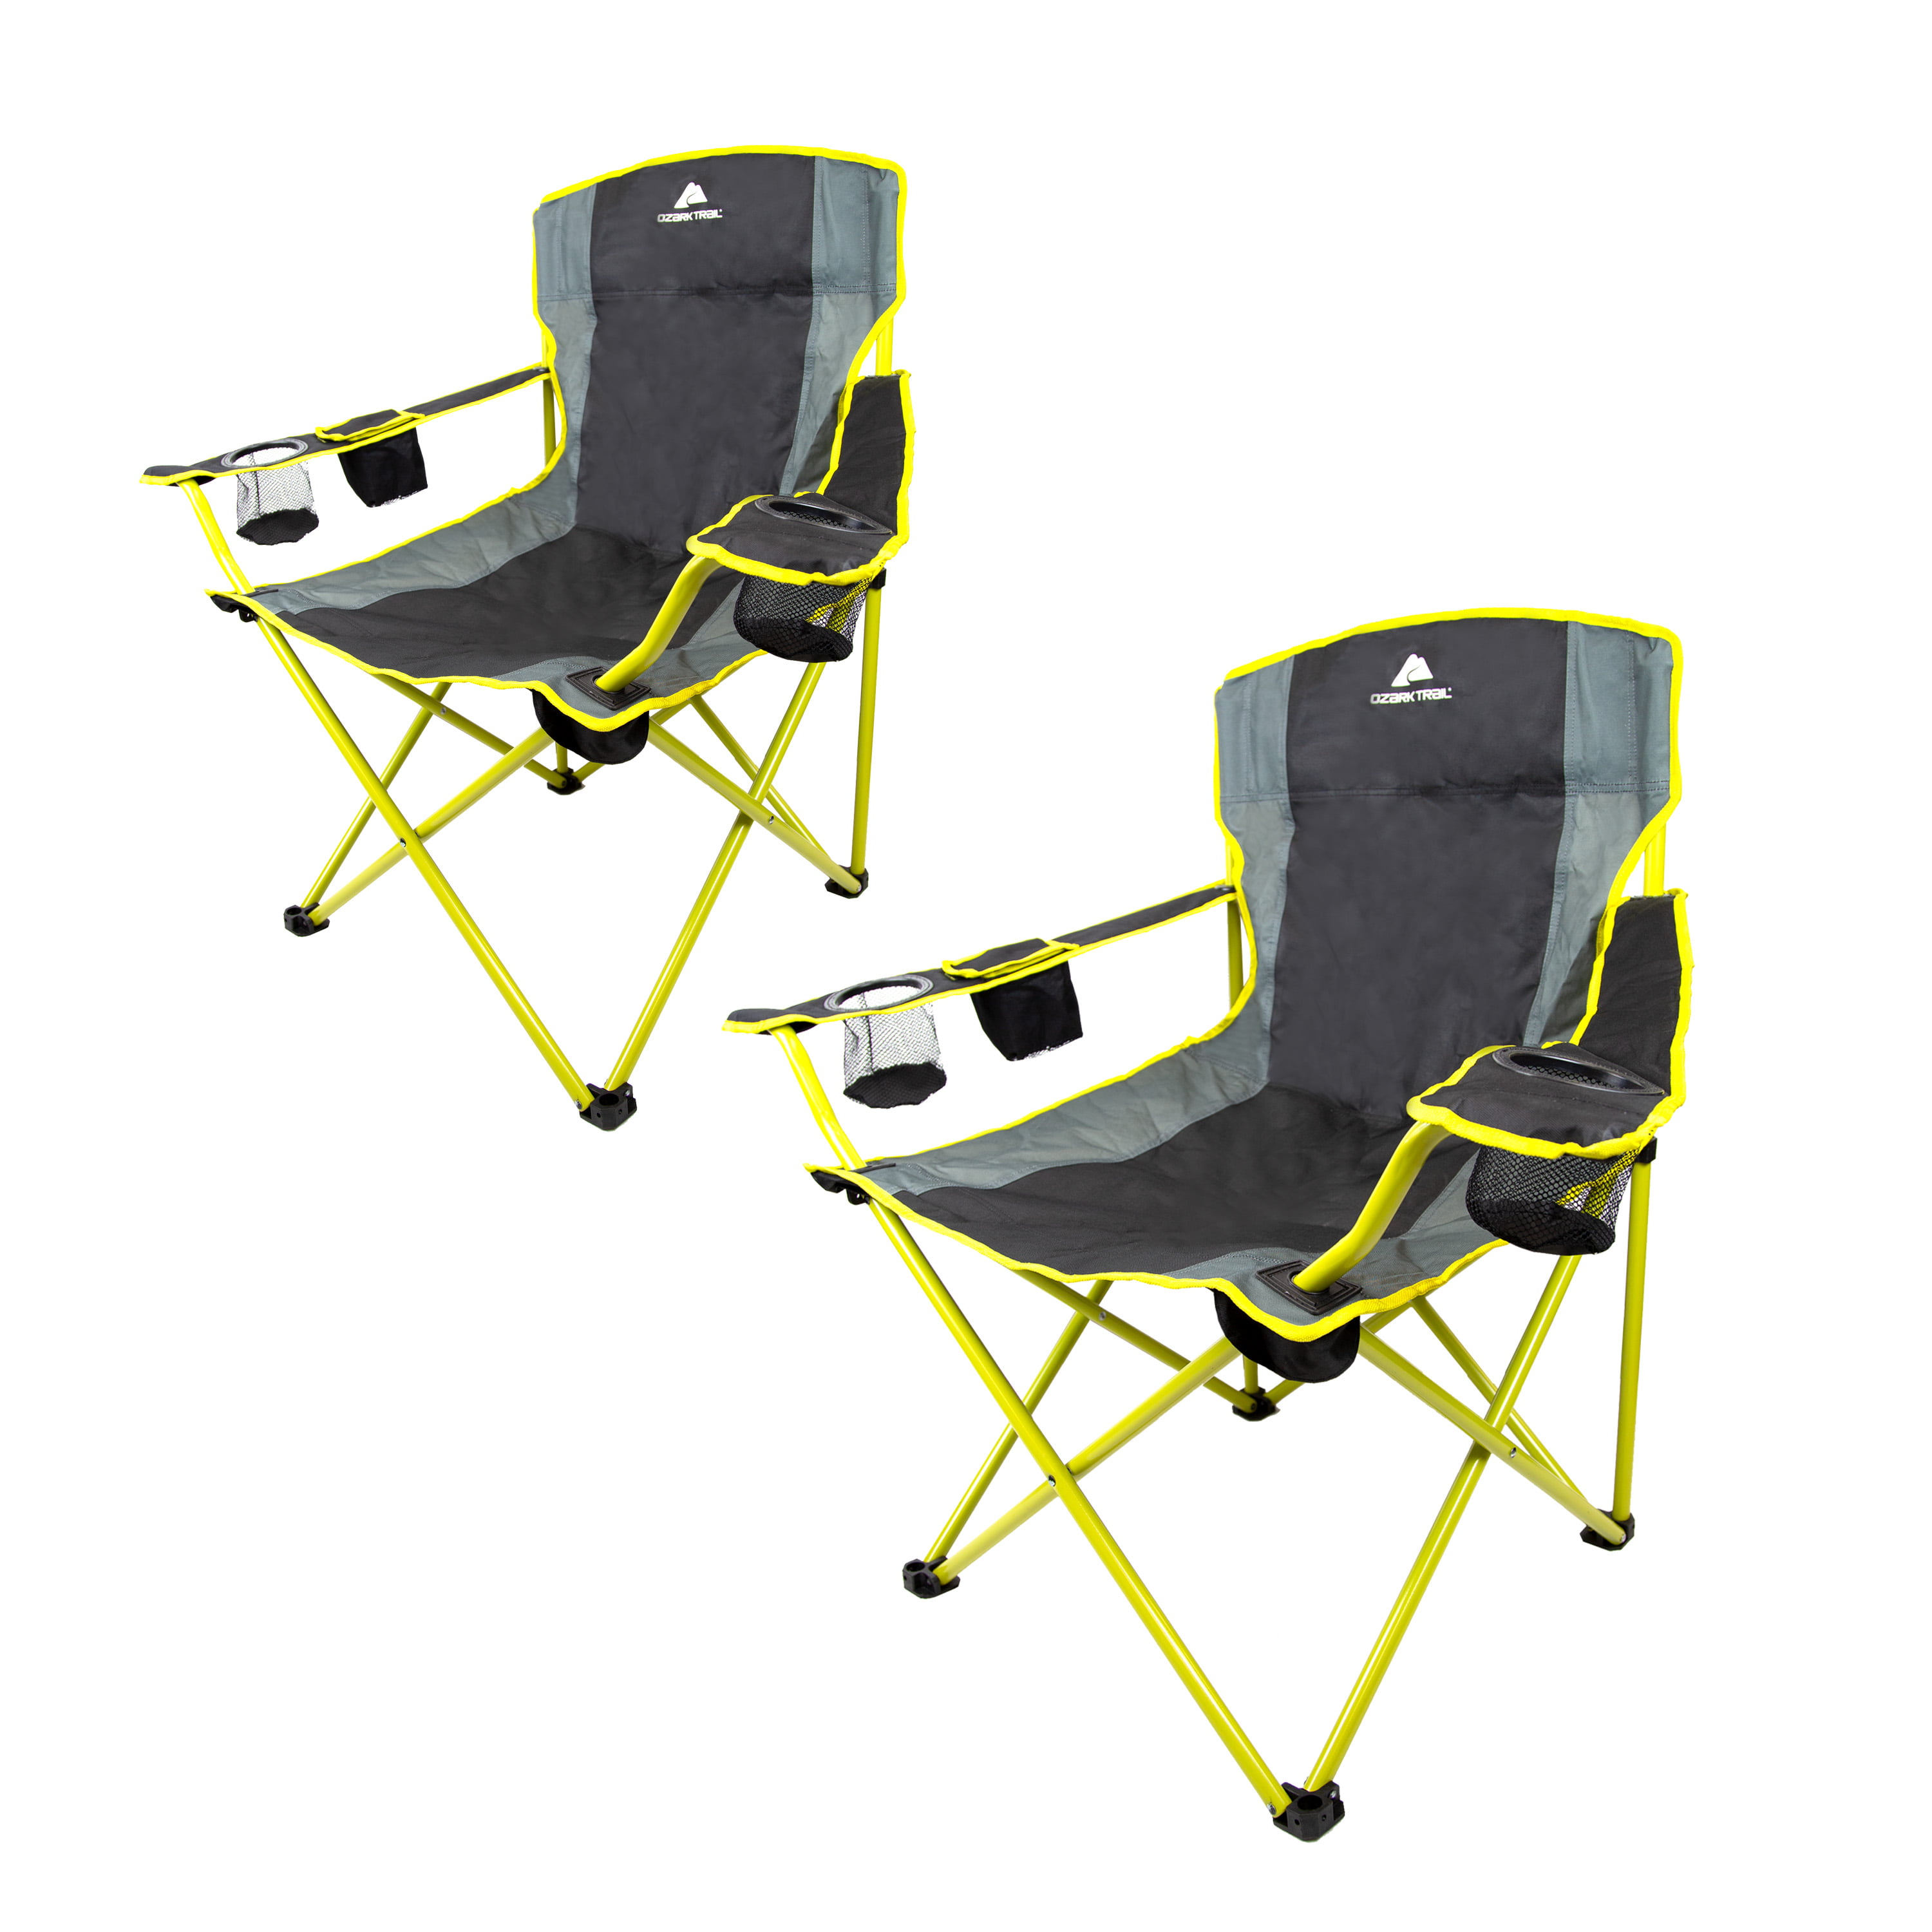 Oversize Camping Lawn Quad Chair Tailgate Comfort In Style Outdoor Indoor Deal 